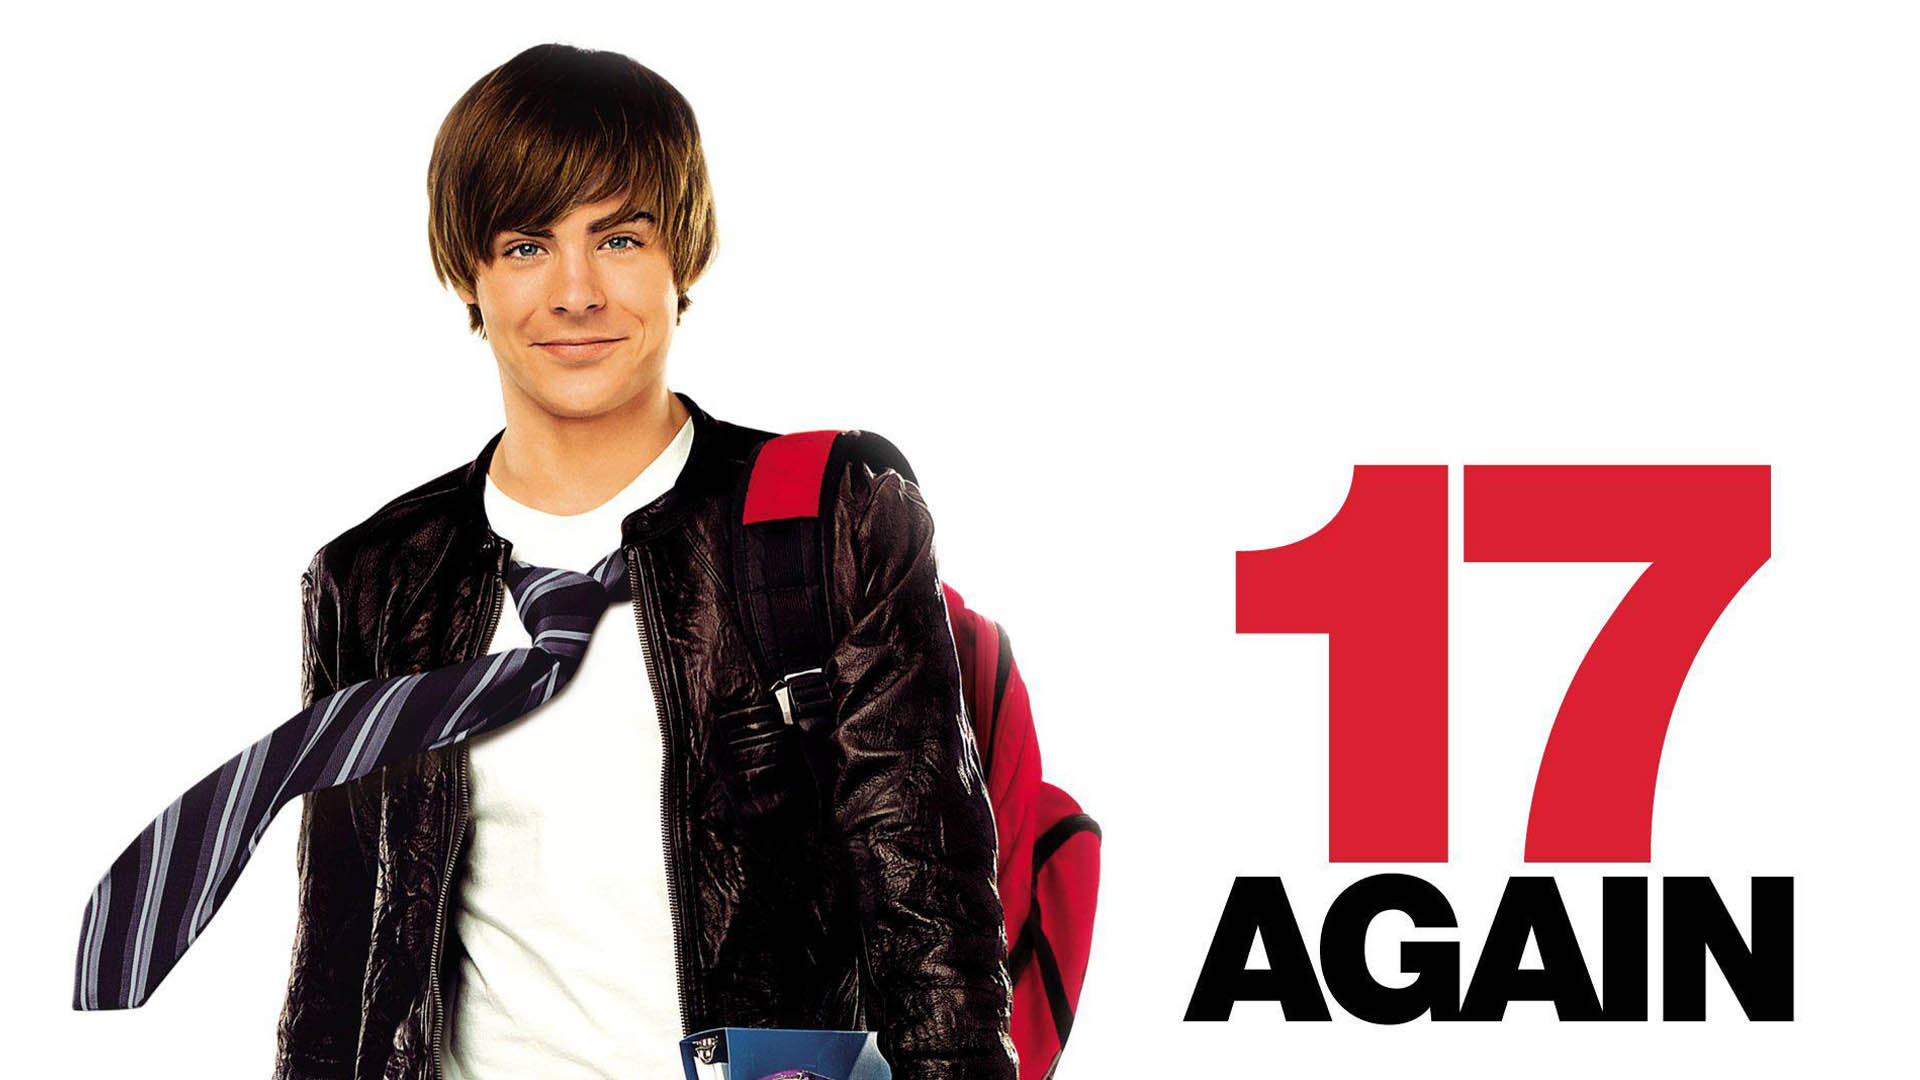 Zac Afran on the cover of the movie 17Again